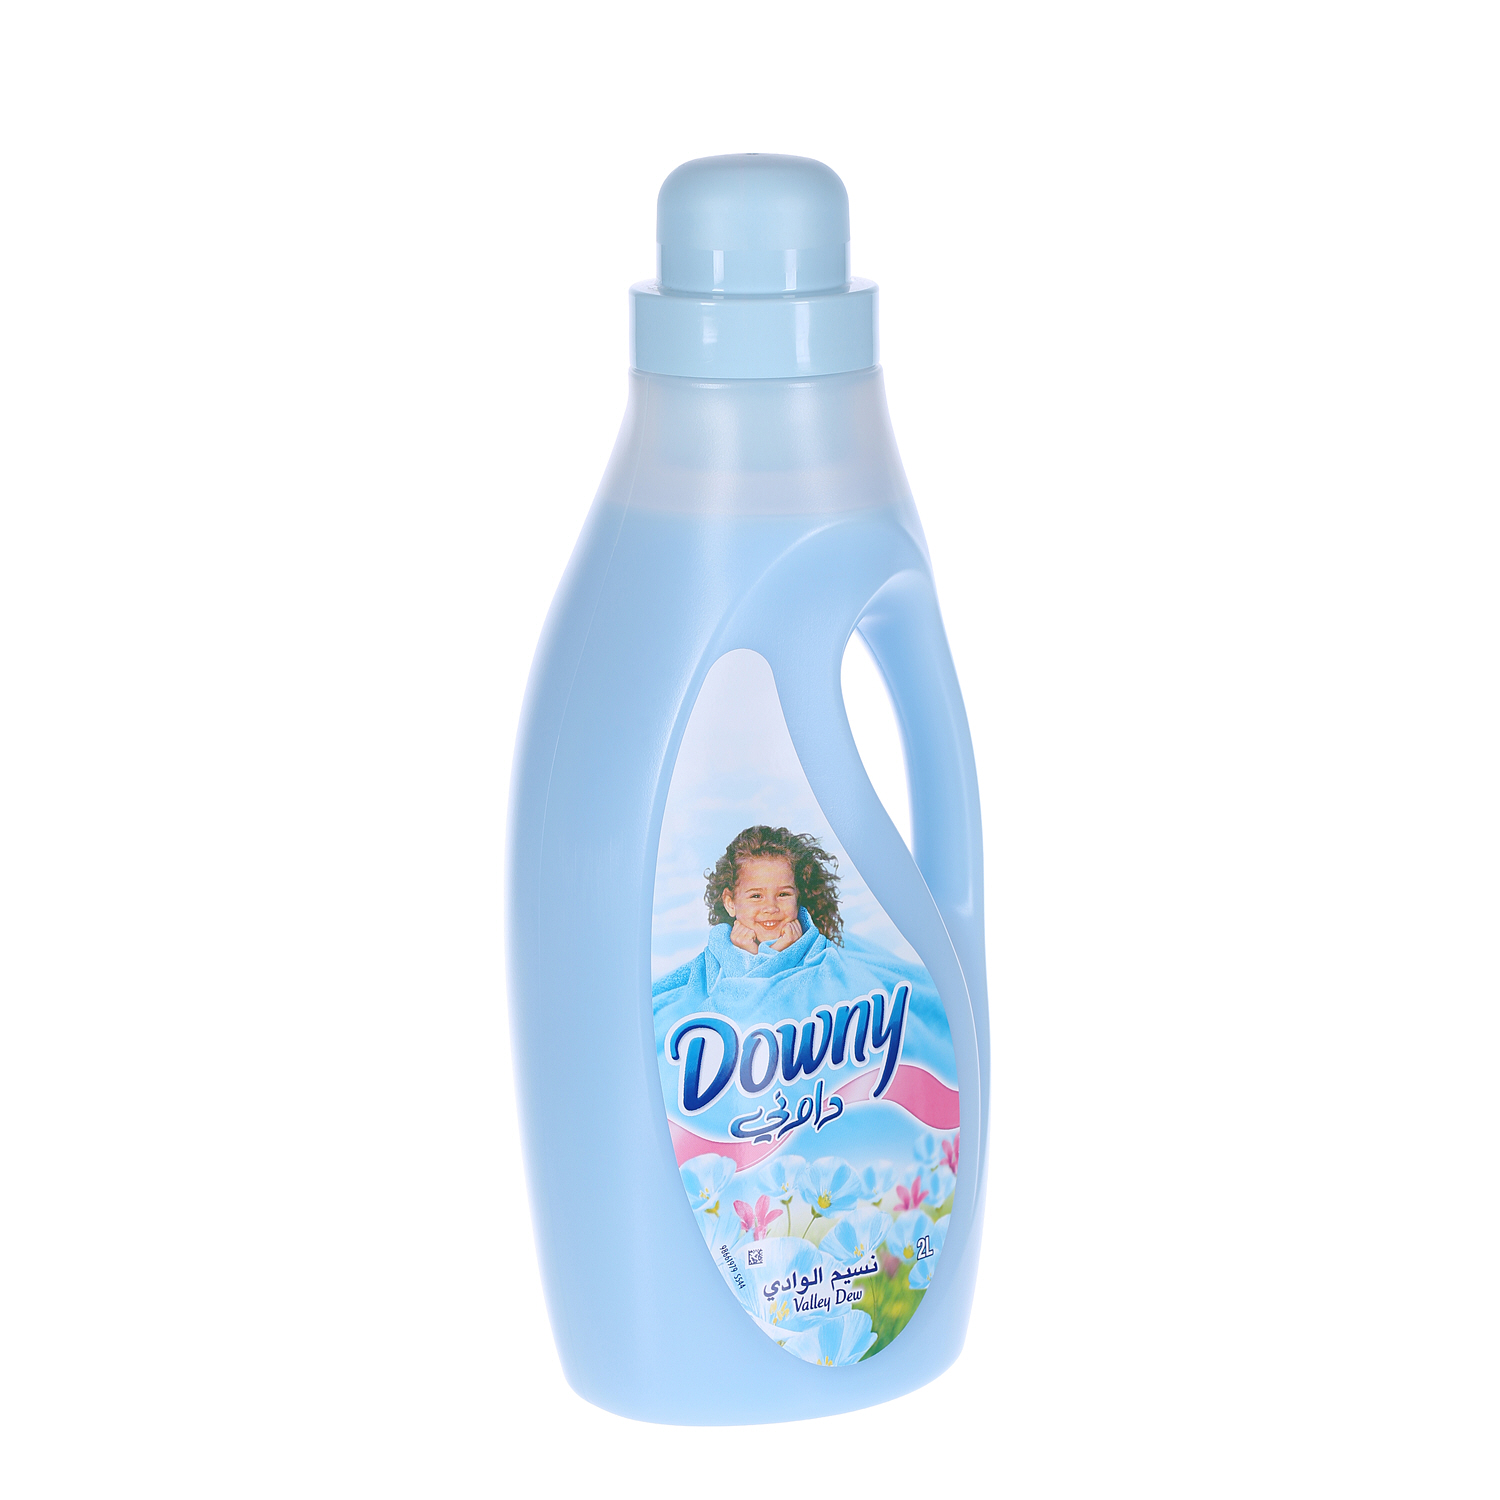 Downy Fabric Softener Valley Dew 2 L